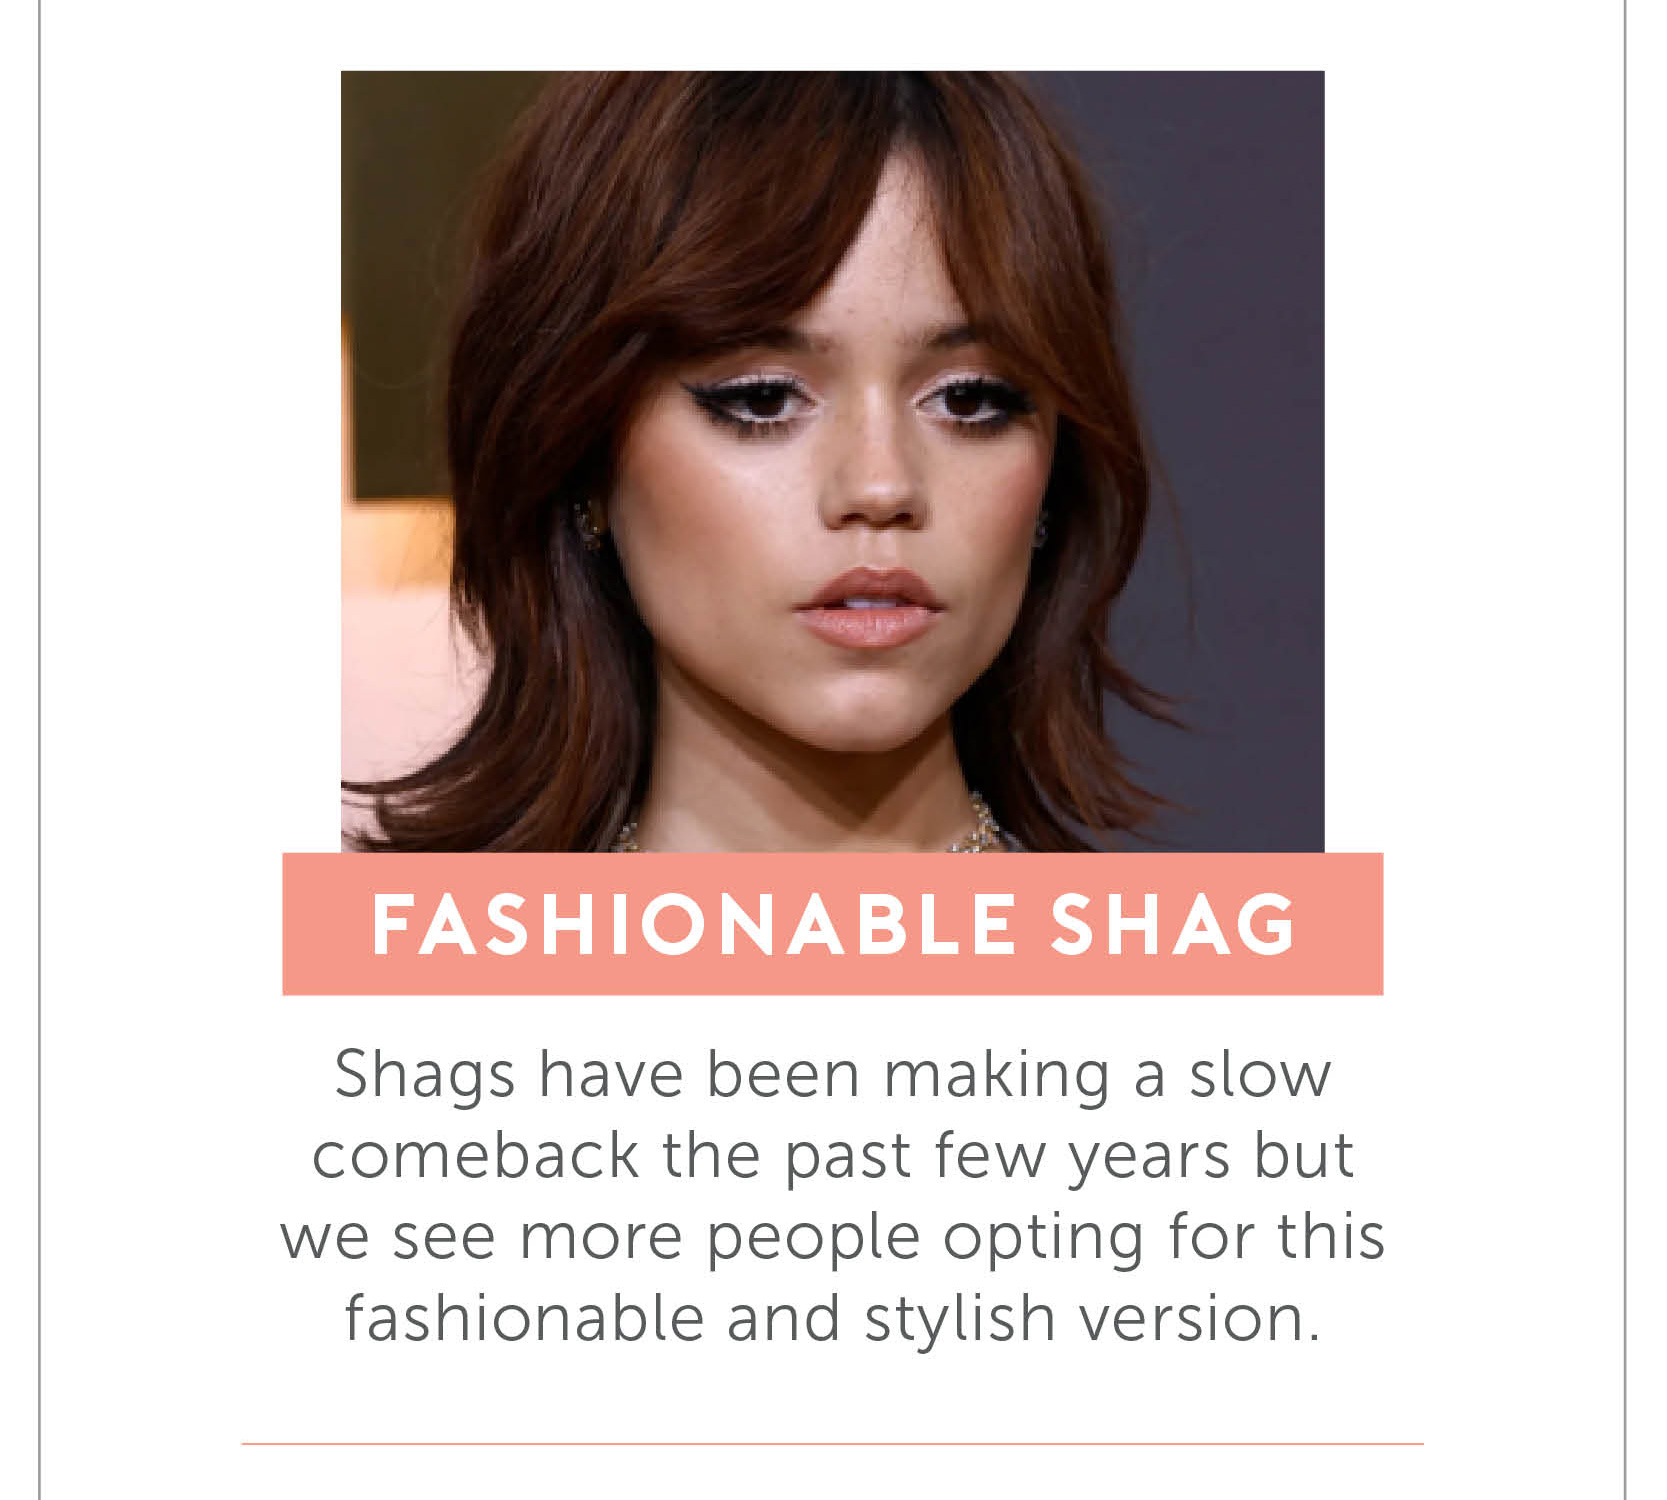 Fashionable Shag - Shags have been making a slow comeback the past few years but we see more people opting for this fashionable and stylish version.